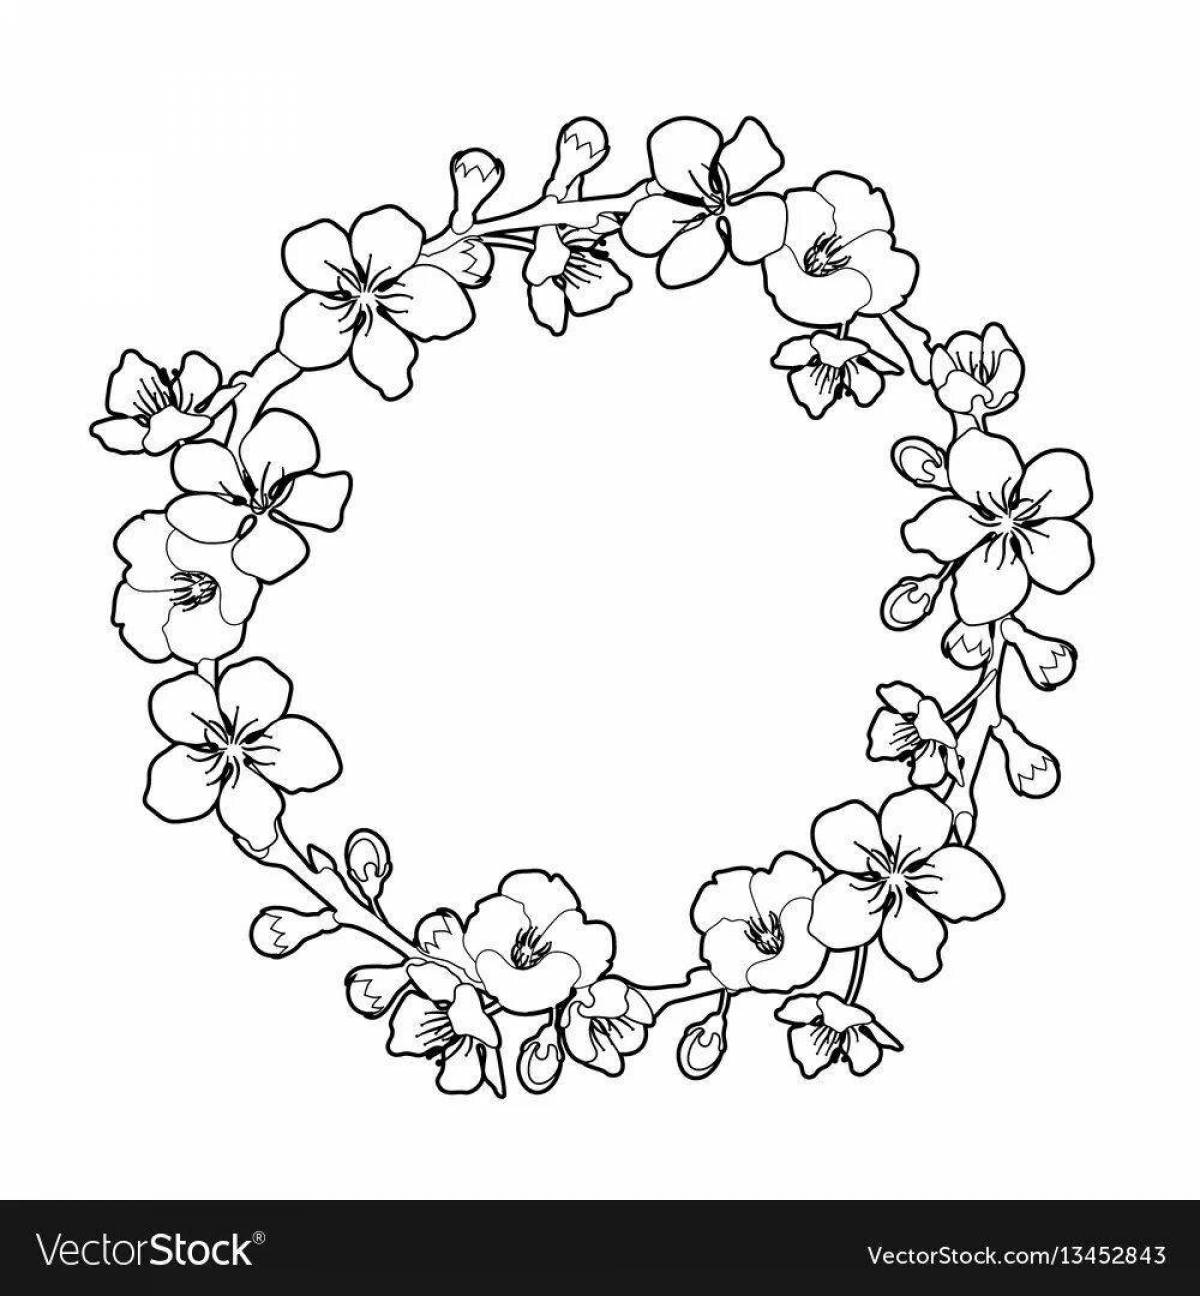 Colouring page stunning wreath of flowers